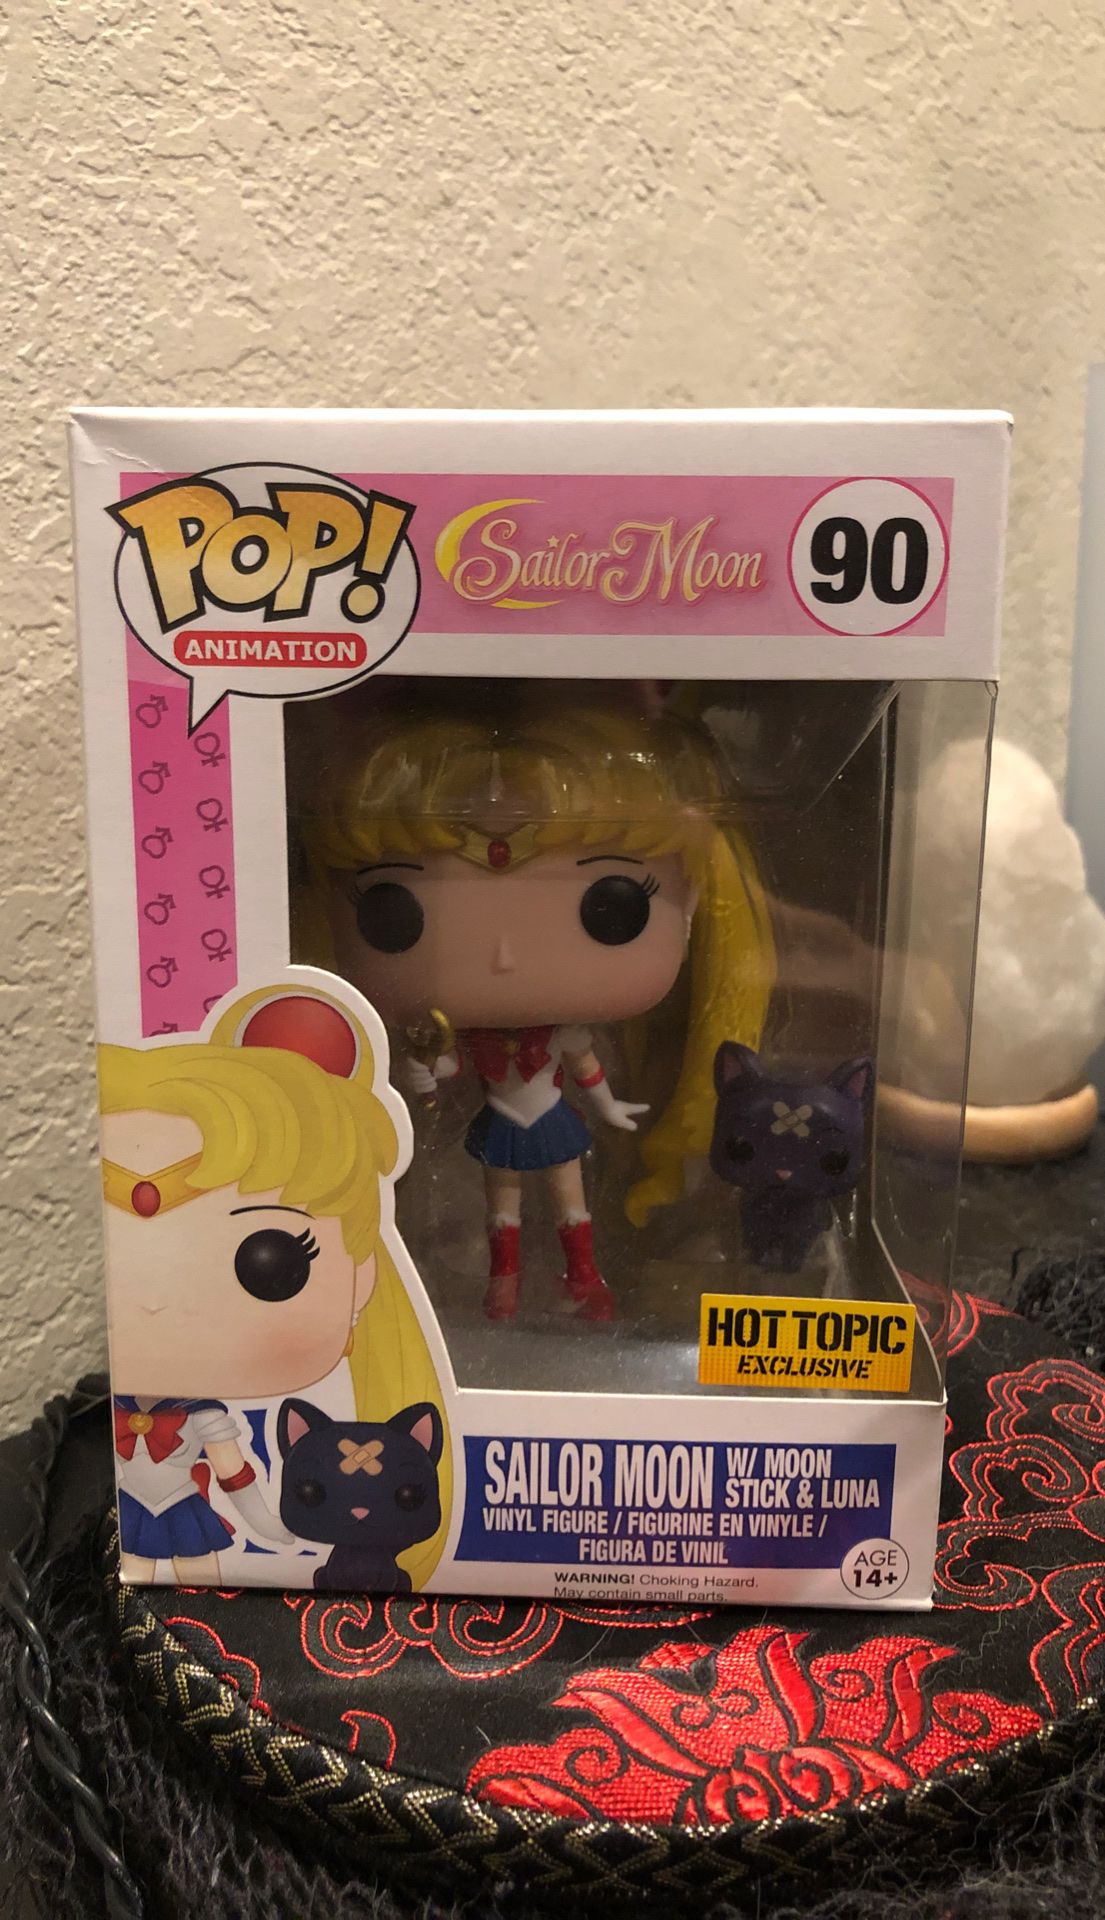 Sailor moon with moon stick and Luna pop